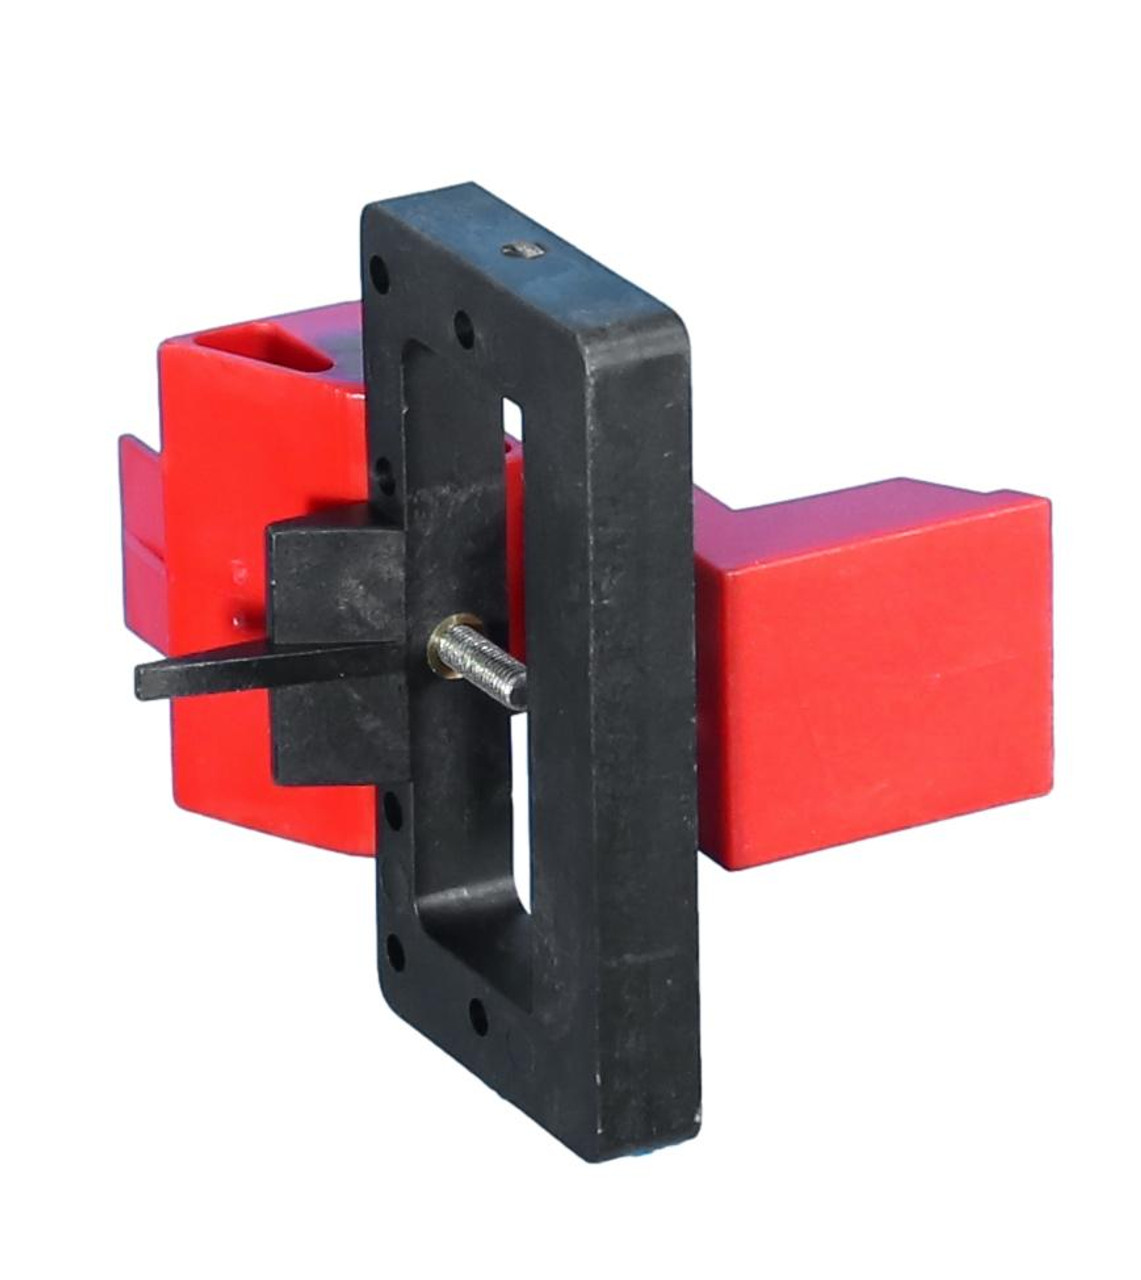 Large Circuit Breaker Lockout Device
by IDEAL 44-823